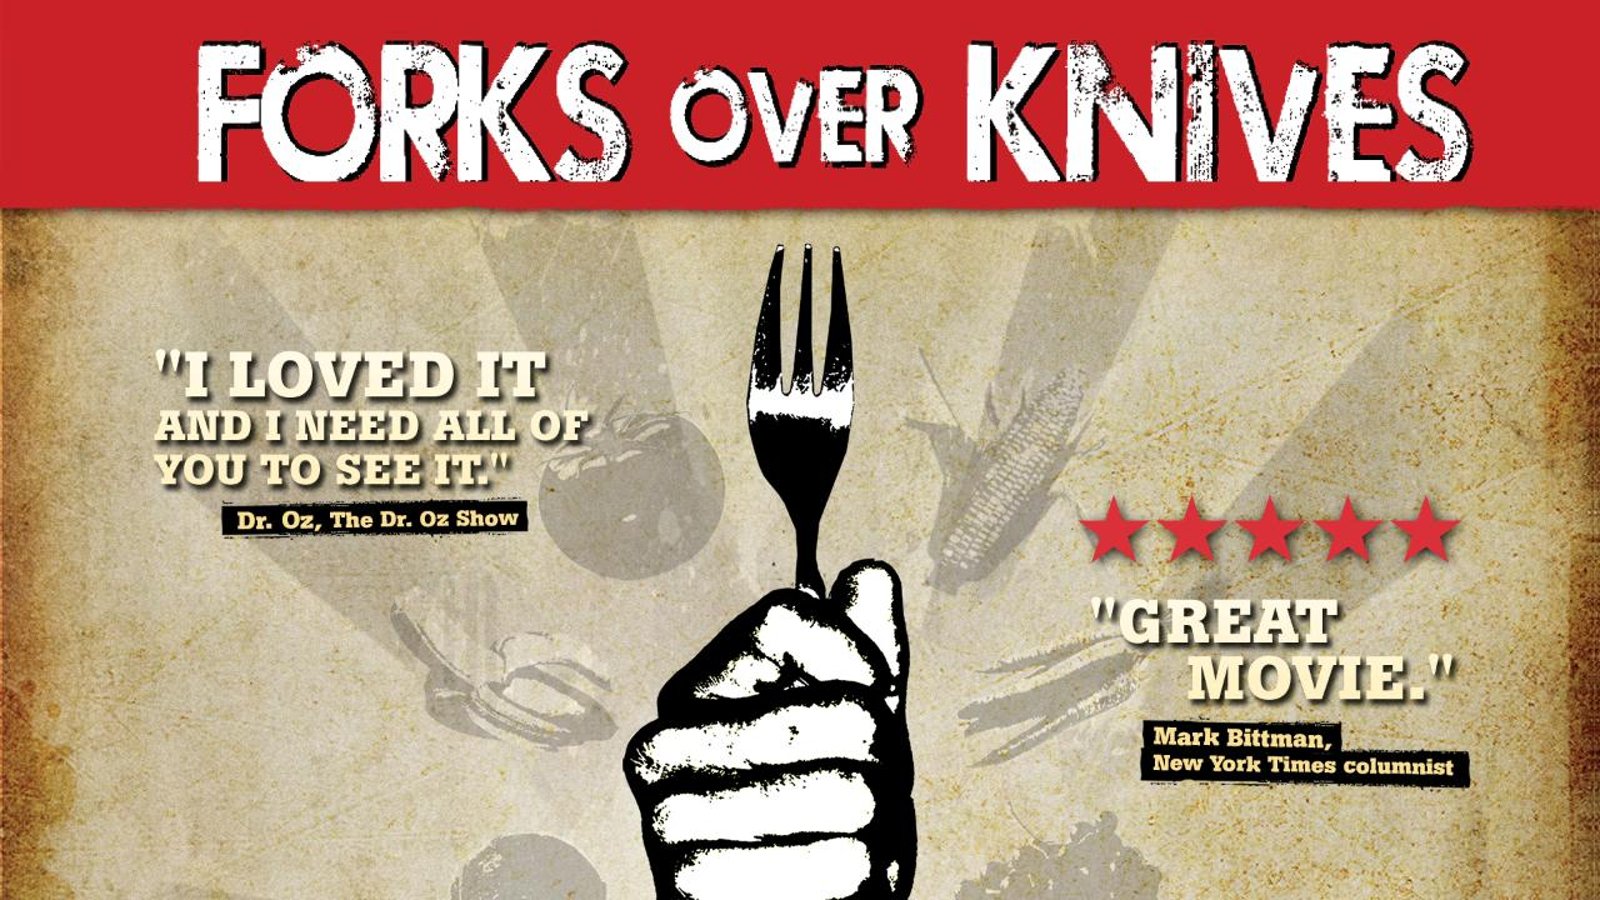 Forks Over Knives - Mass Food Consumption and Escalating Rates of Health Decline